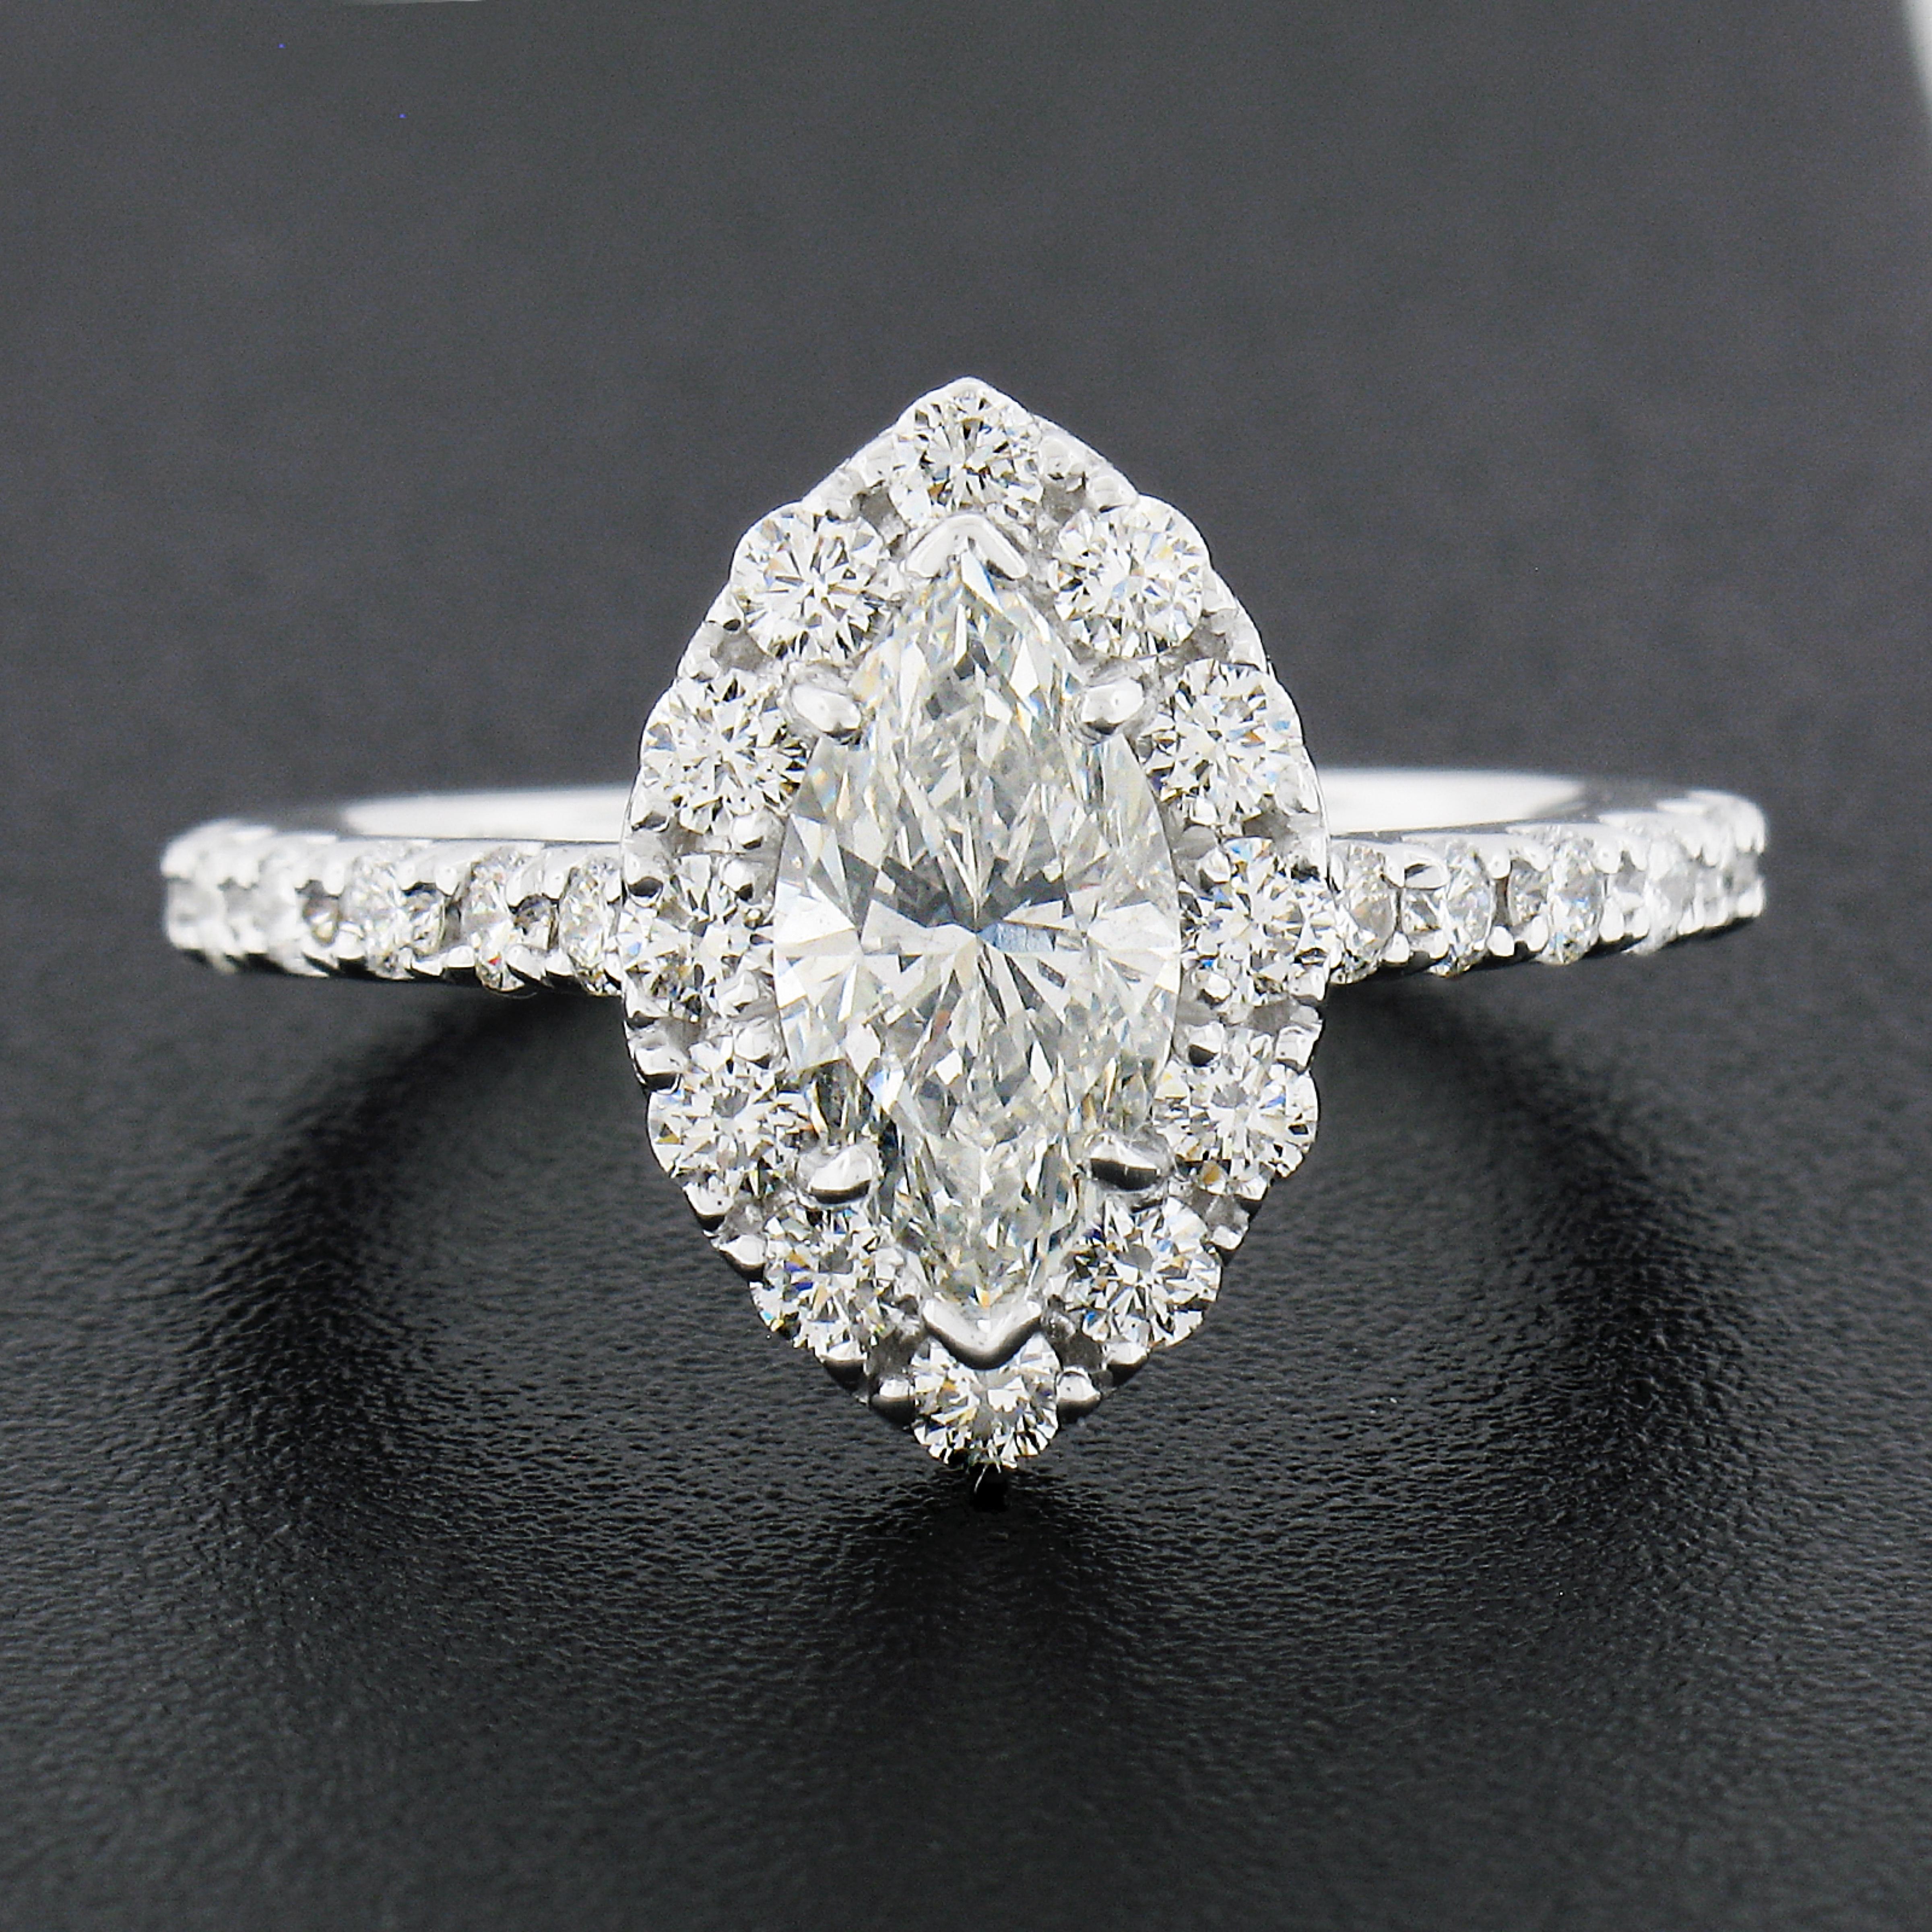 Here we have a gorgeous diamond engagement ring that is newly crafted from solid 18k white gold. The ring features a stunning, GIA certified, marquise cut diamond that is neatly prong set at the center of a fiery round brilliant diamond halo design.